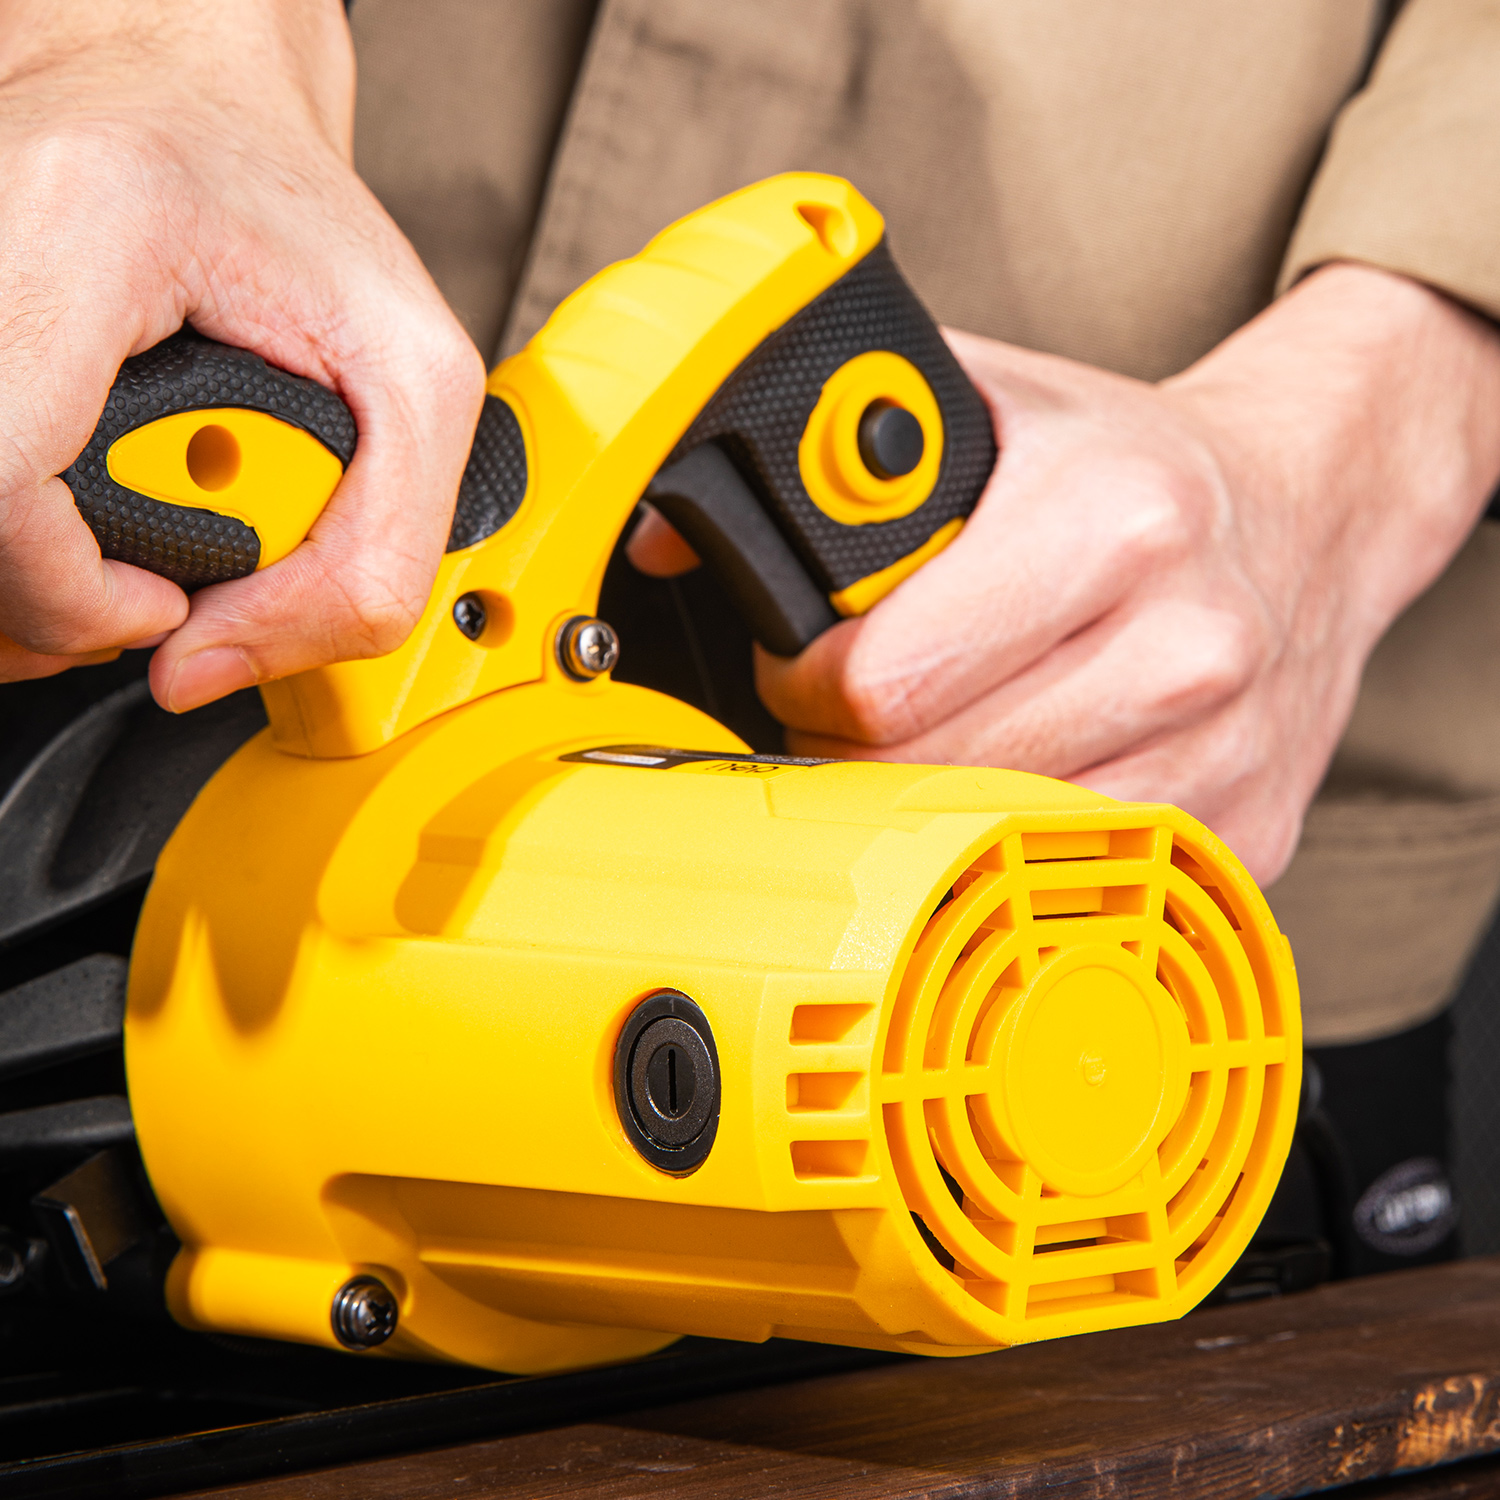 Variable Speed Hand Power Tool for Drill